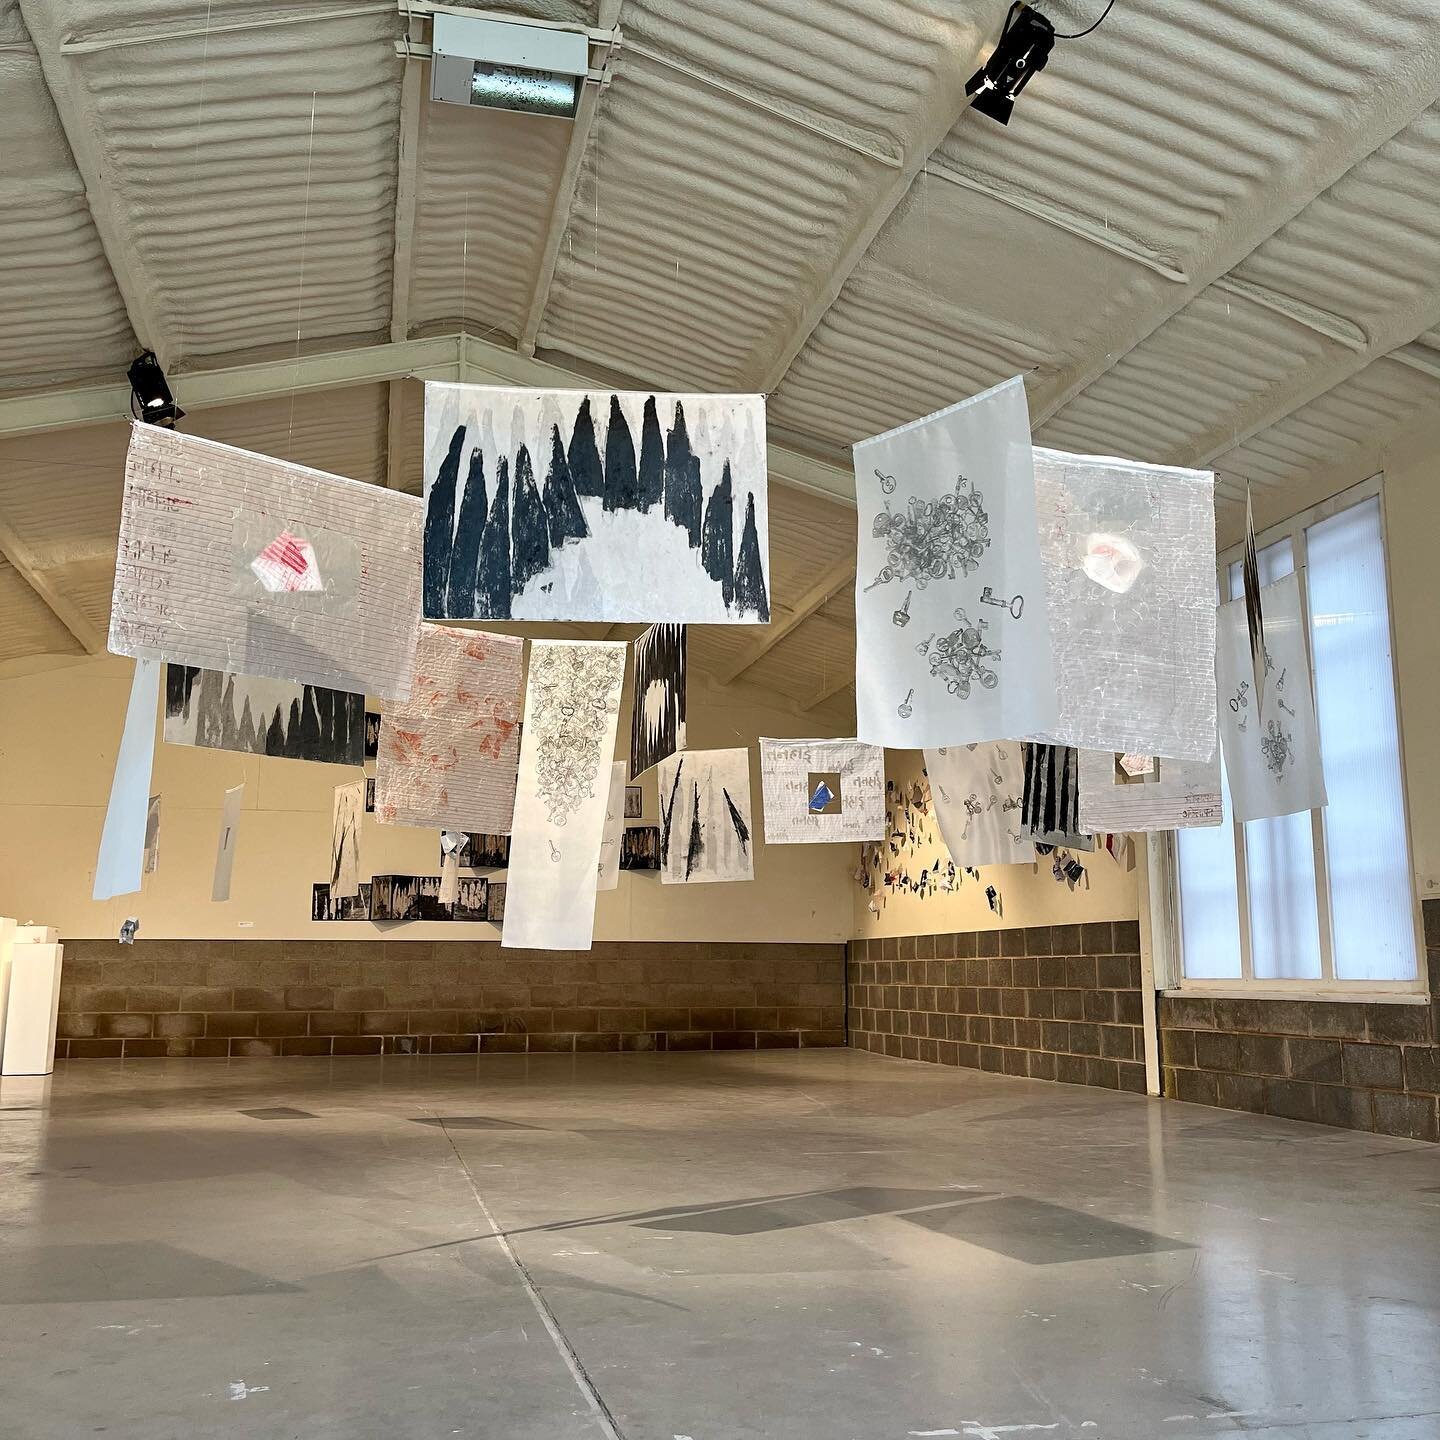 Some exhibitions just work. &lsquo;Alone Together&rsquo; @canwoodgallery is one of them. 

The exhibition&rsquo;s core features a beautiful, collaborative print installation that you walk around, passing through the work, weaving in and out of its in